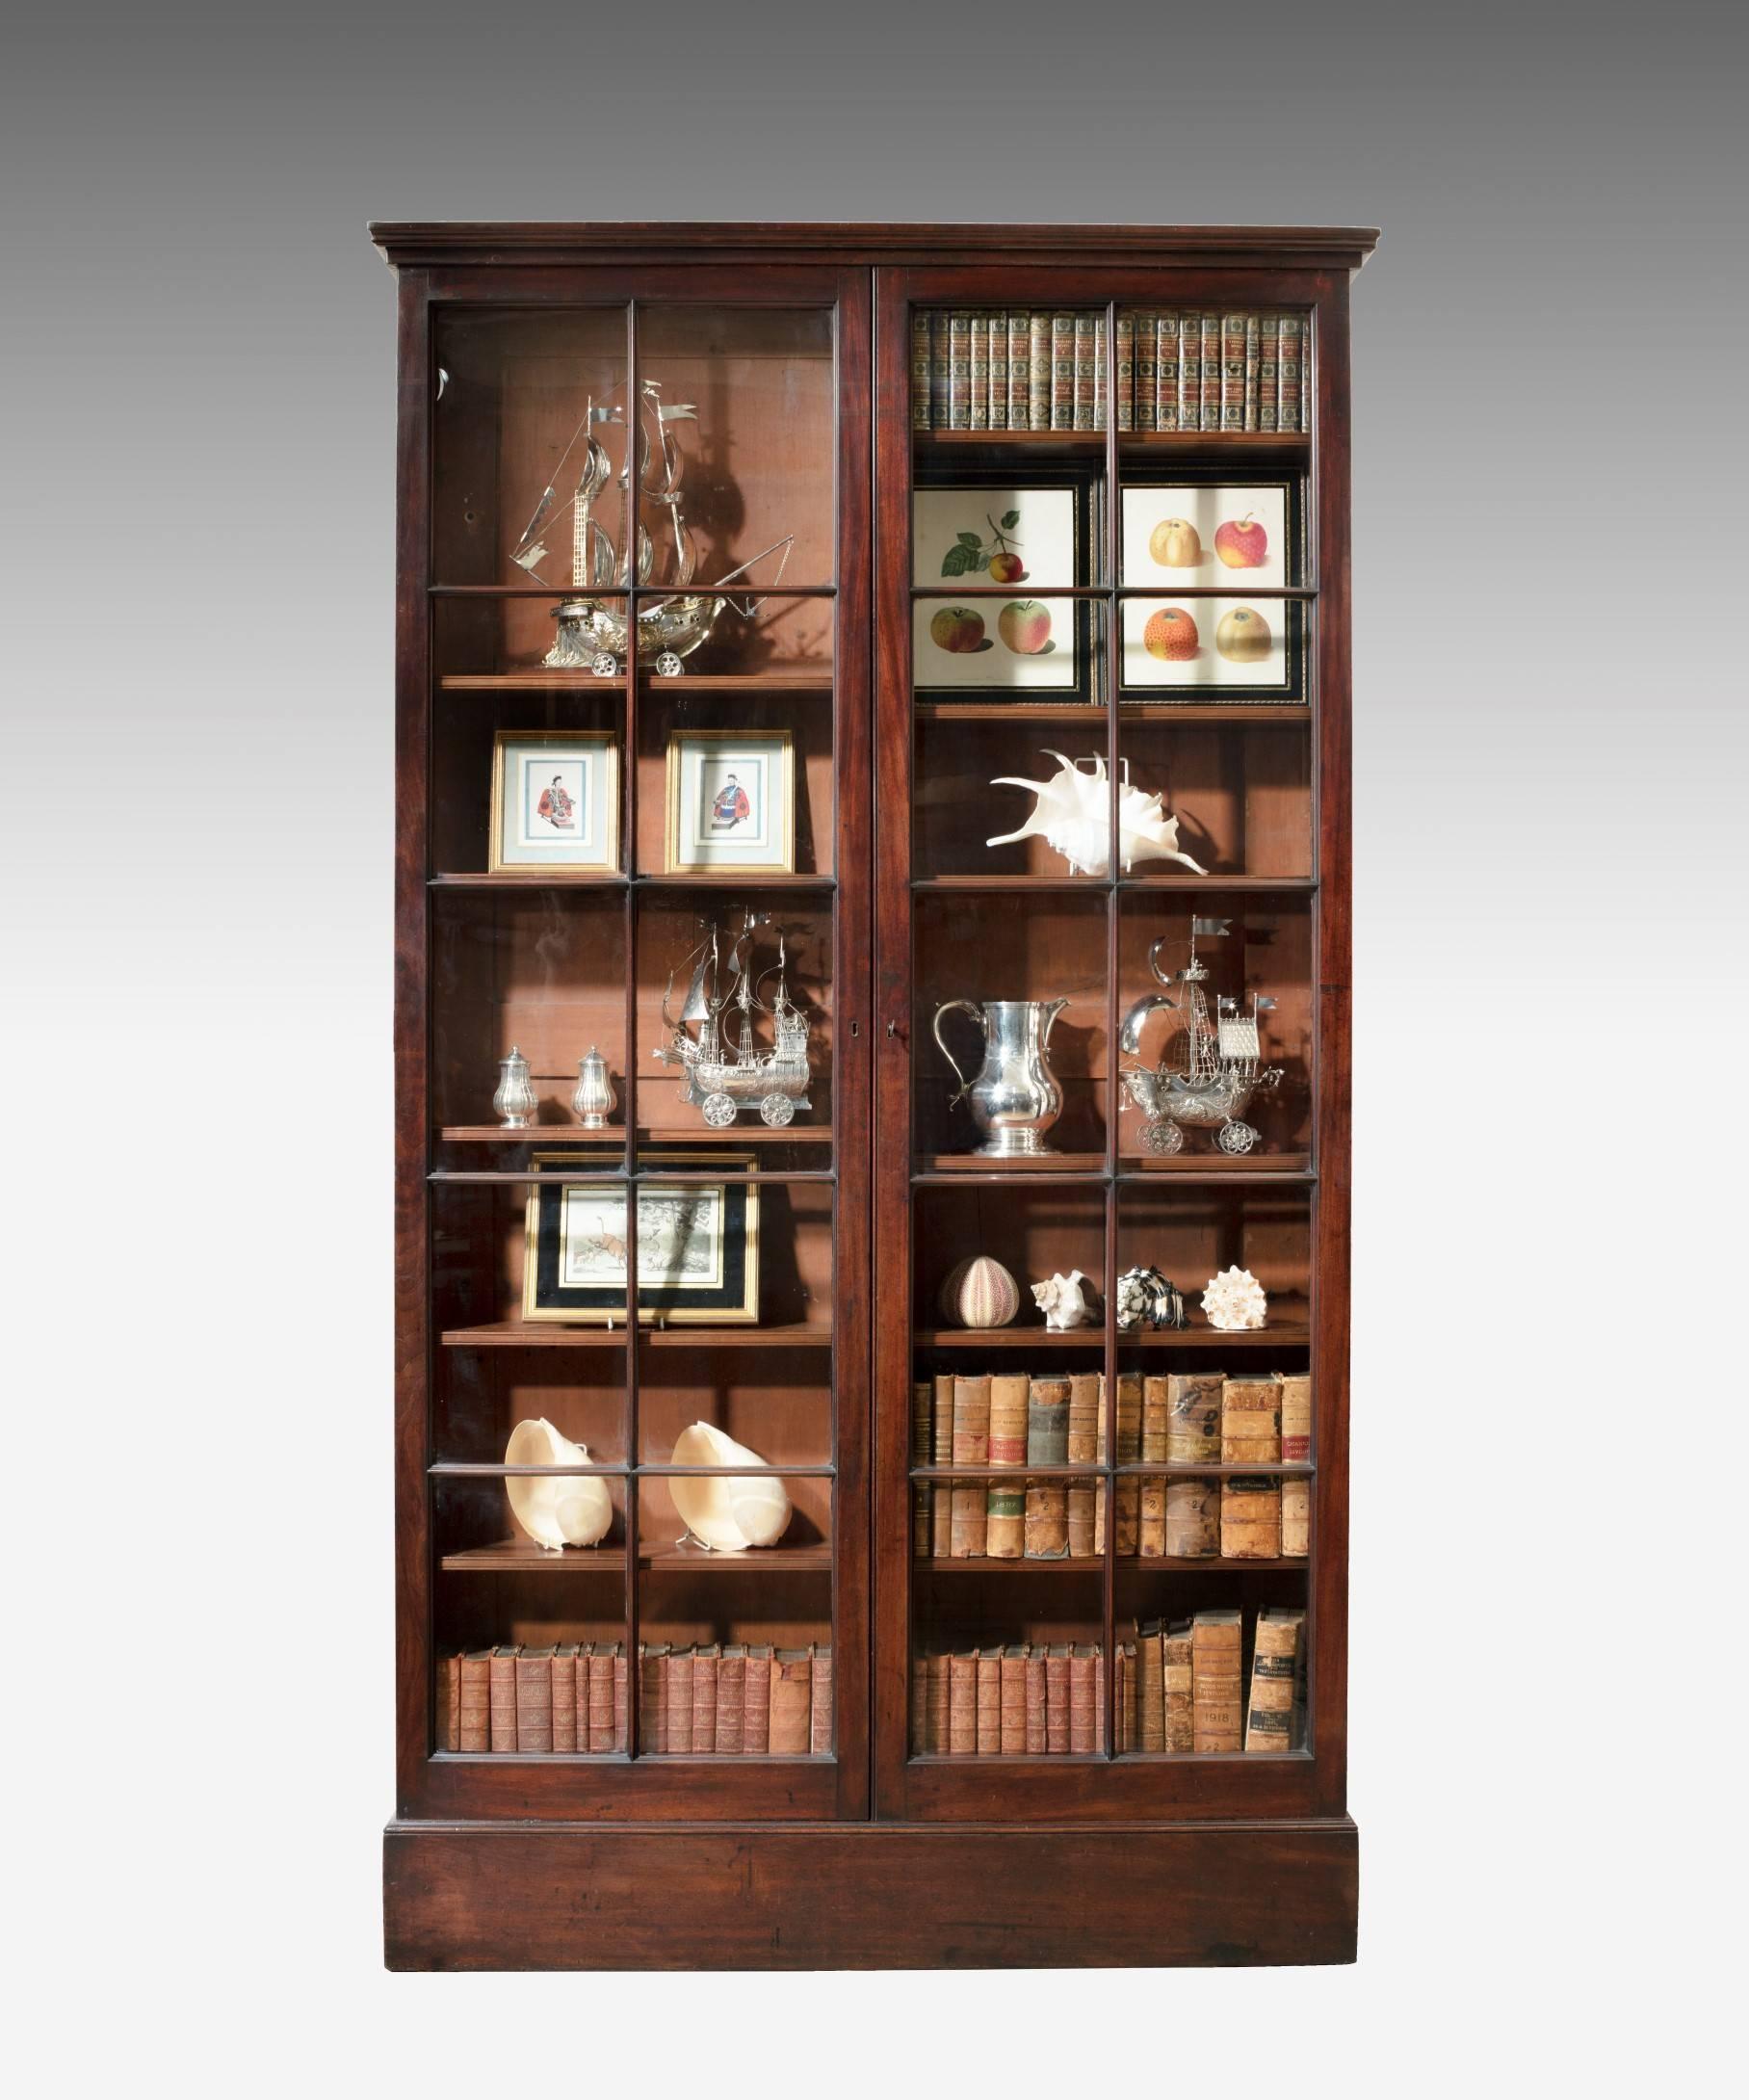 A George II period mahogany two-door bookcase; the stepped cornice above a pair of glazed doors which open to reveal adjustable shelves and raised on a plinth base. Retaining an excellent color and patination.

This bookcase's simple clean design